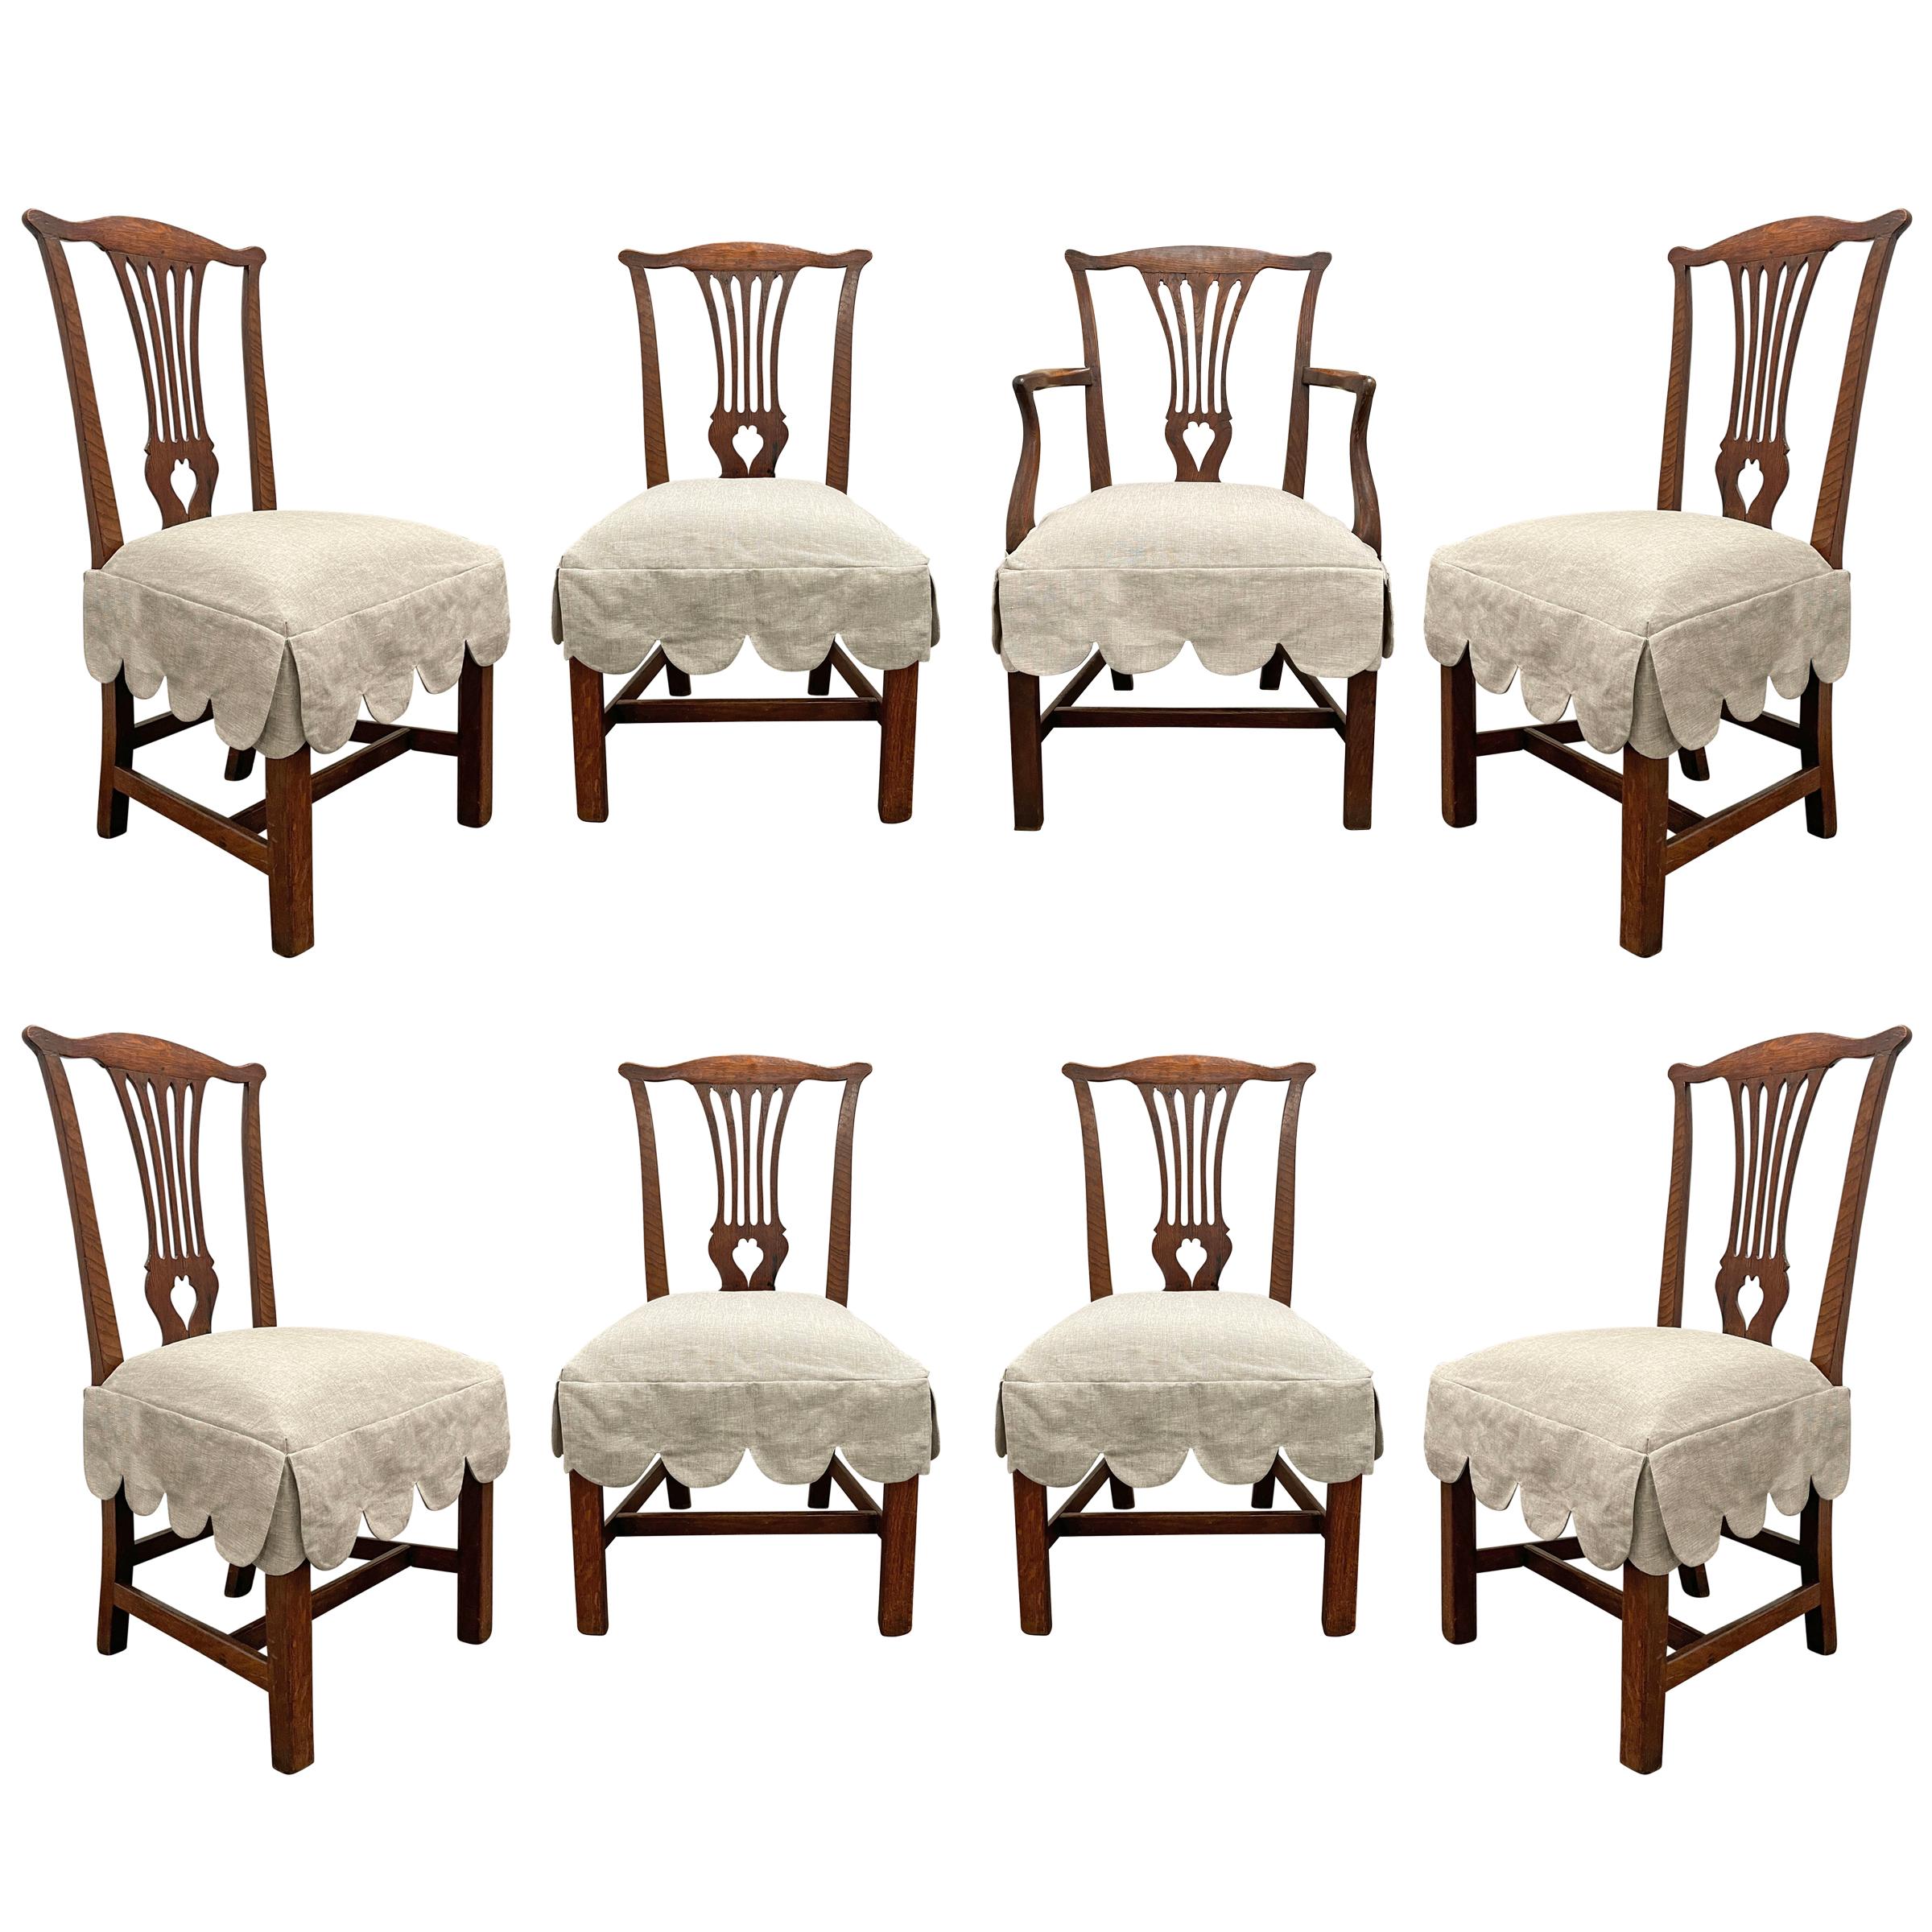 English Set of Eight 18th Century Chippendale Dining Chairs with Custom Slipcovers